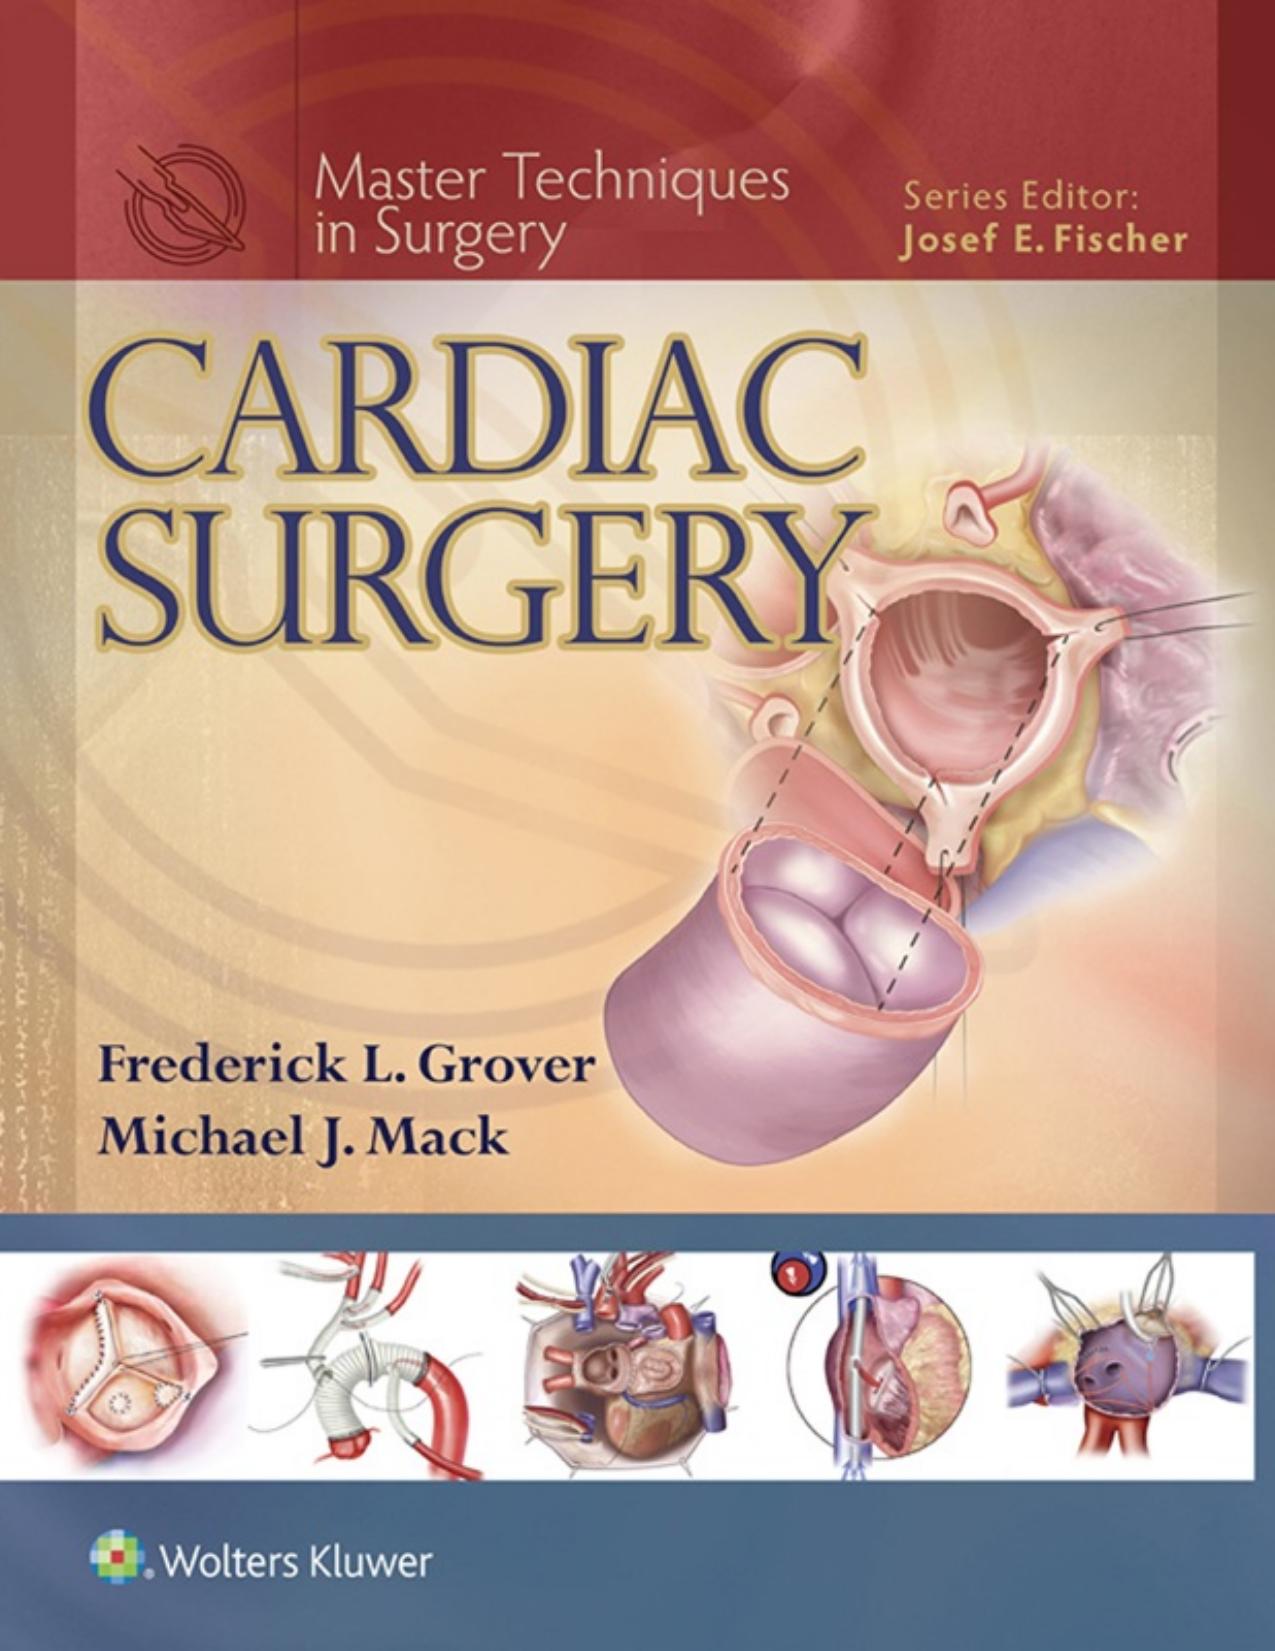 Master Techniques in Surgery: Cardiac Surgery - PDFDrive.com